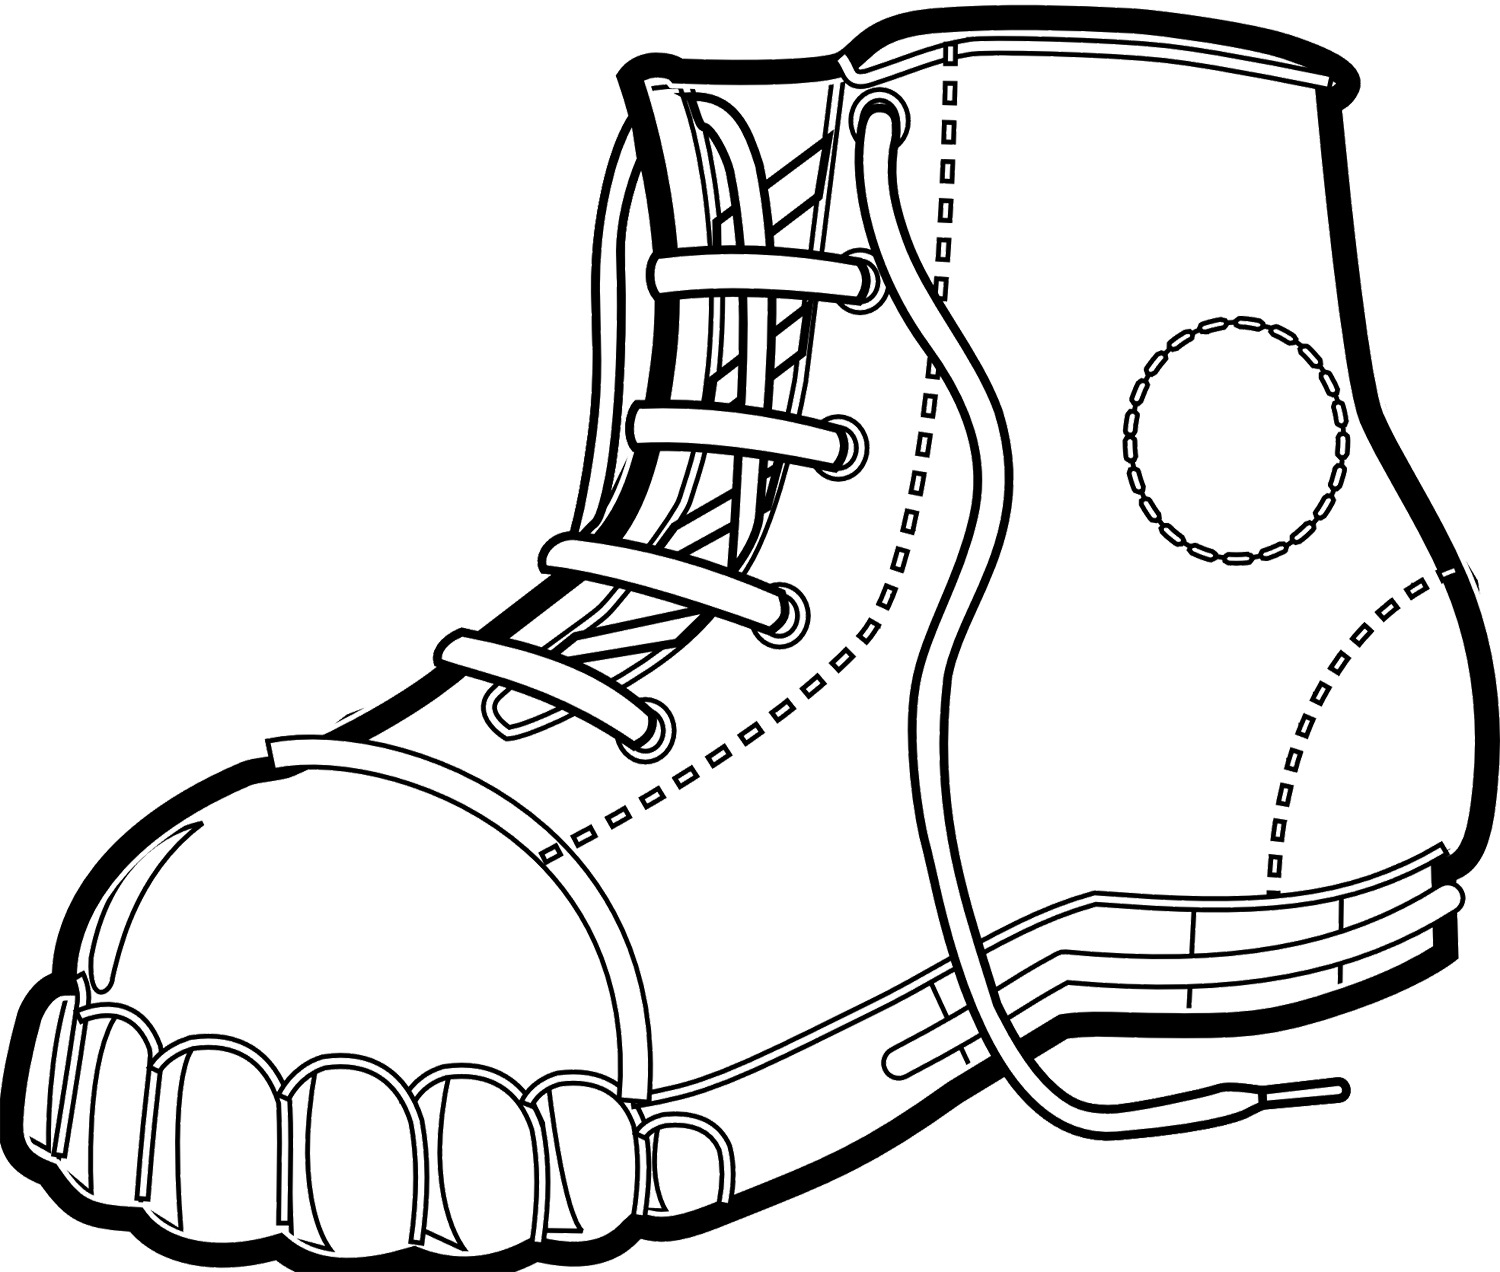 Winter Boots Clipart